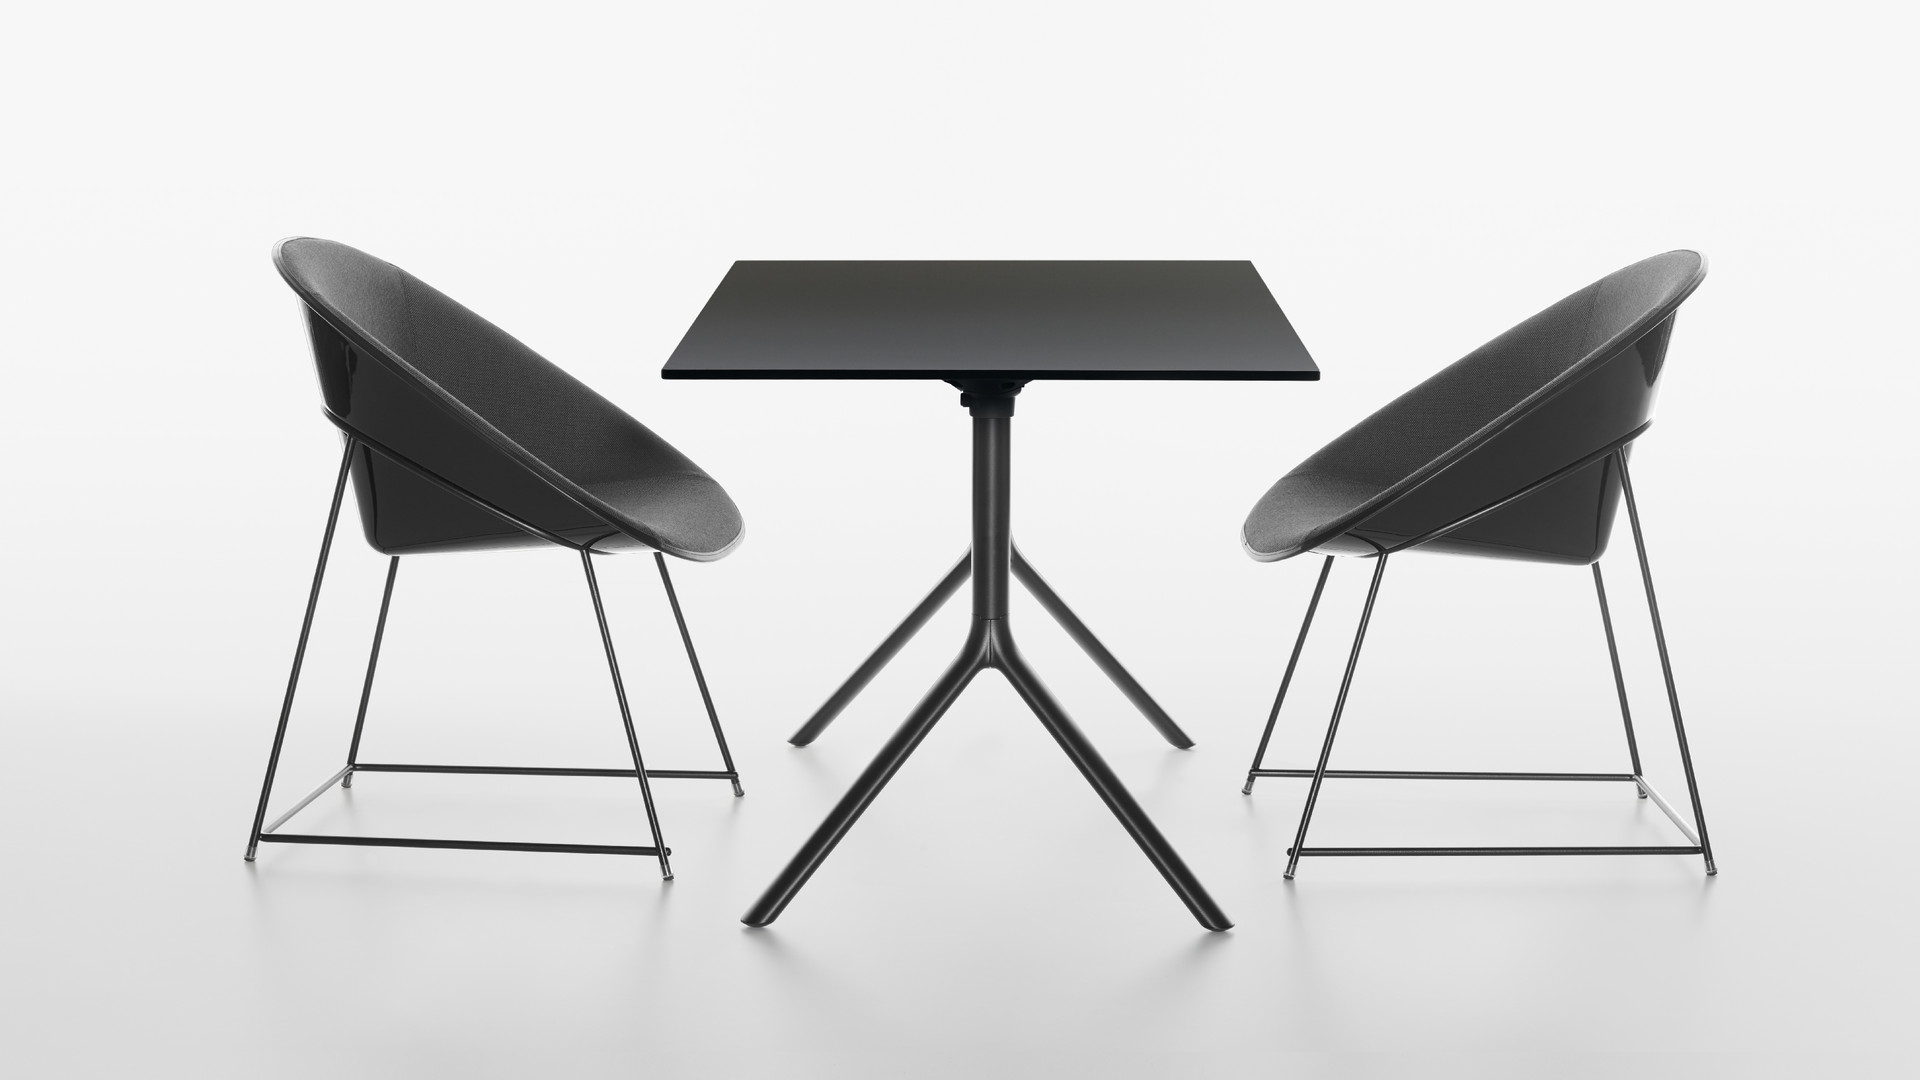 cup, dining chair, armchair, lounge chair, konstantin grcic